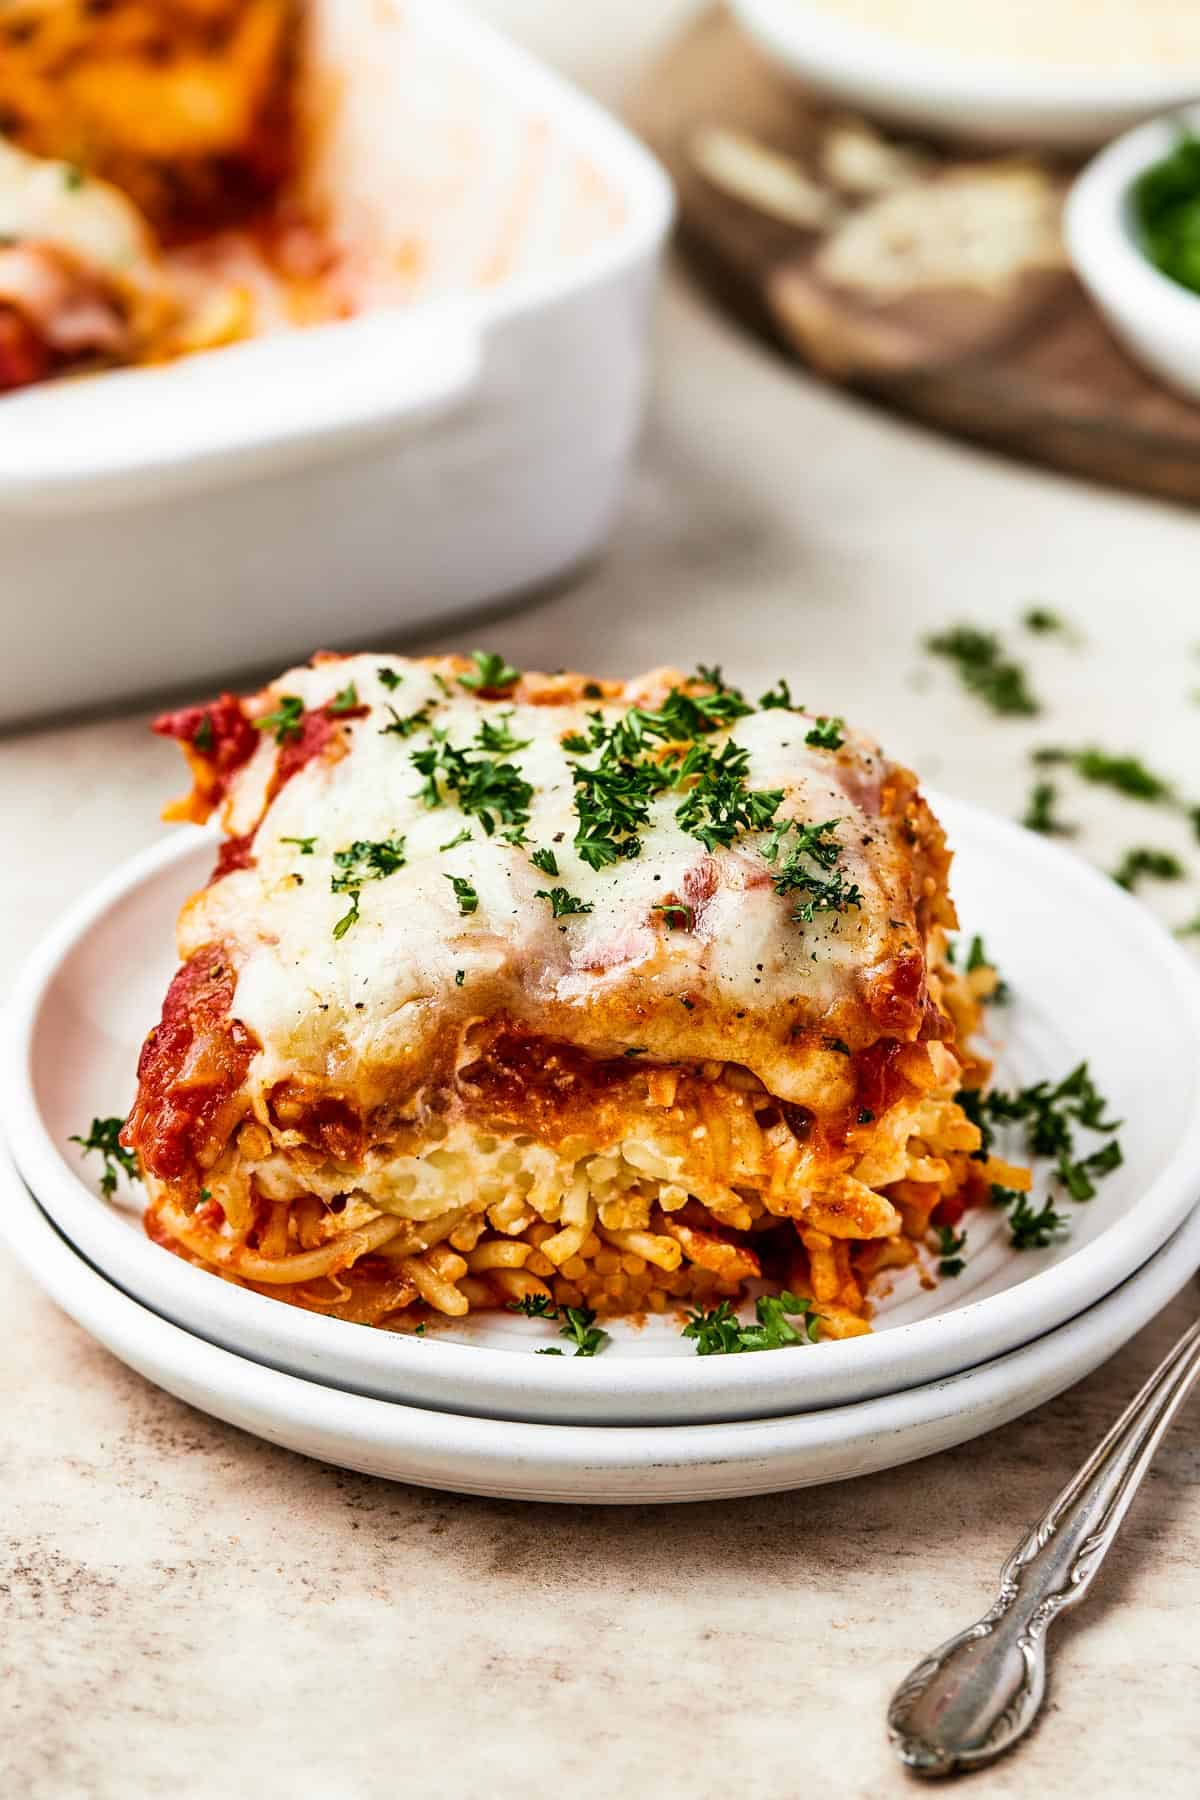 A square of baked spaghetti on a plate.